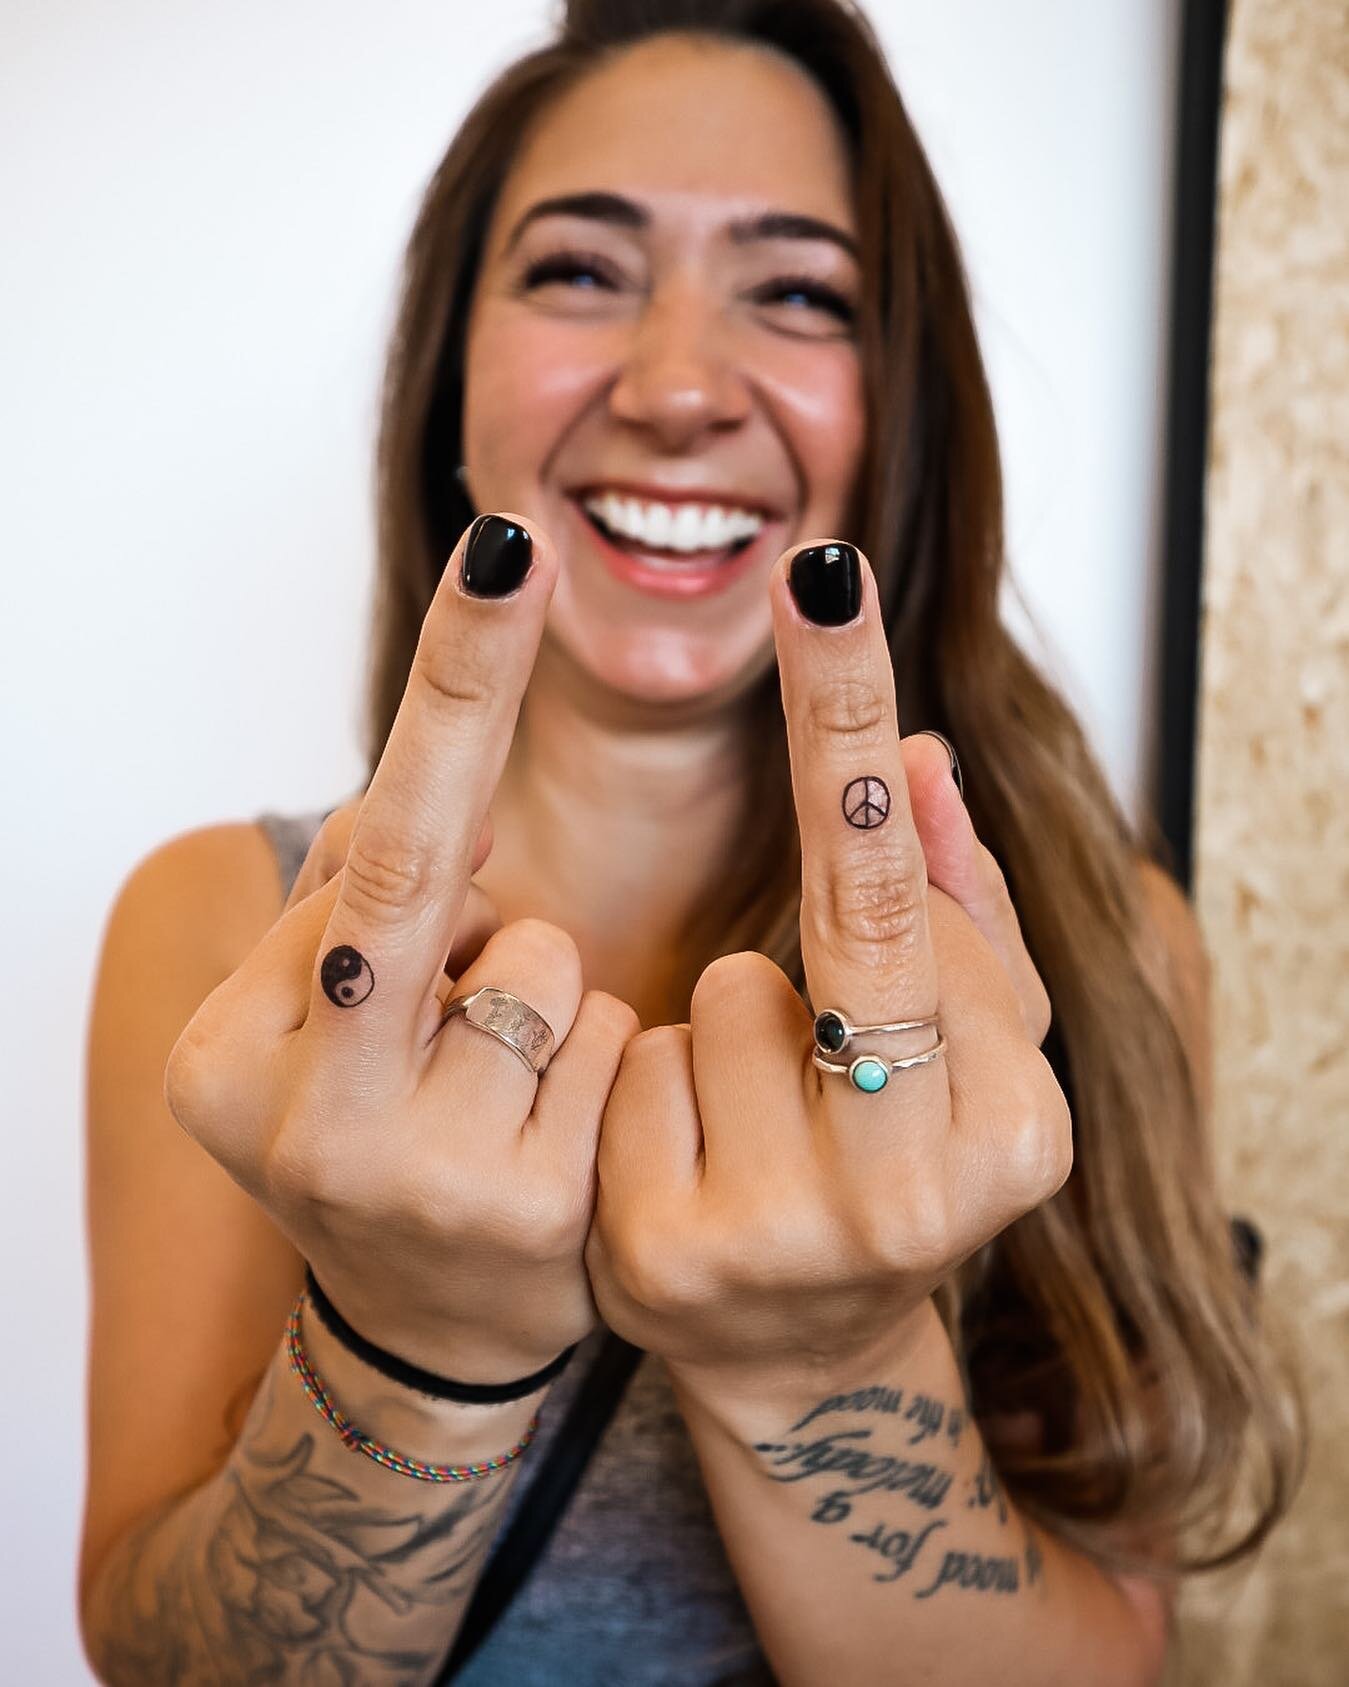 When the finger tattoos are too good not to show off 😜 

Can&rsquo;t wait to do more fun tats with you @inthemoodfora_melody 🎉

#tucsonaz#downtowntucson#tucsontattoo#femaletattooartist#finelinetattoo#finelinetattooaz#tucsonfinelinetattoos#fingertat